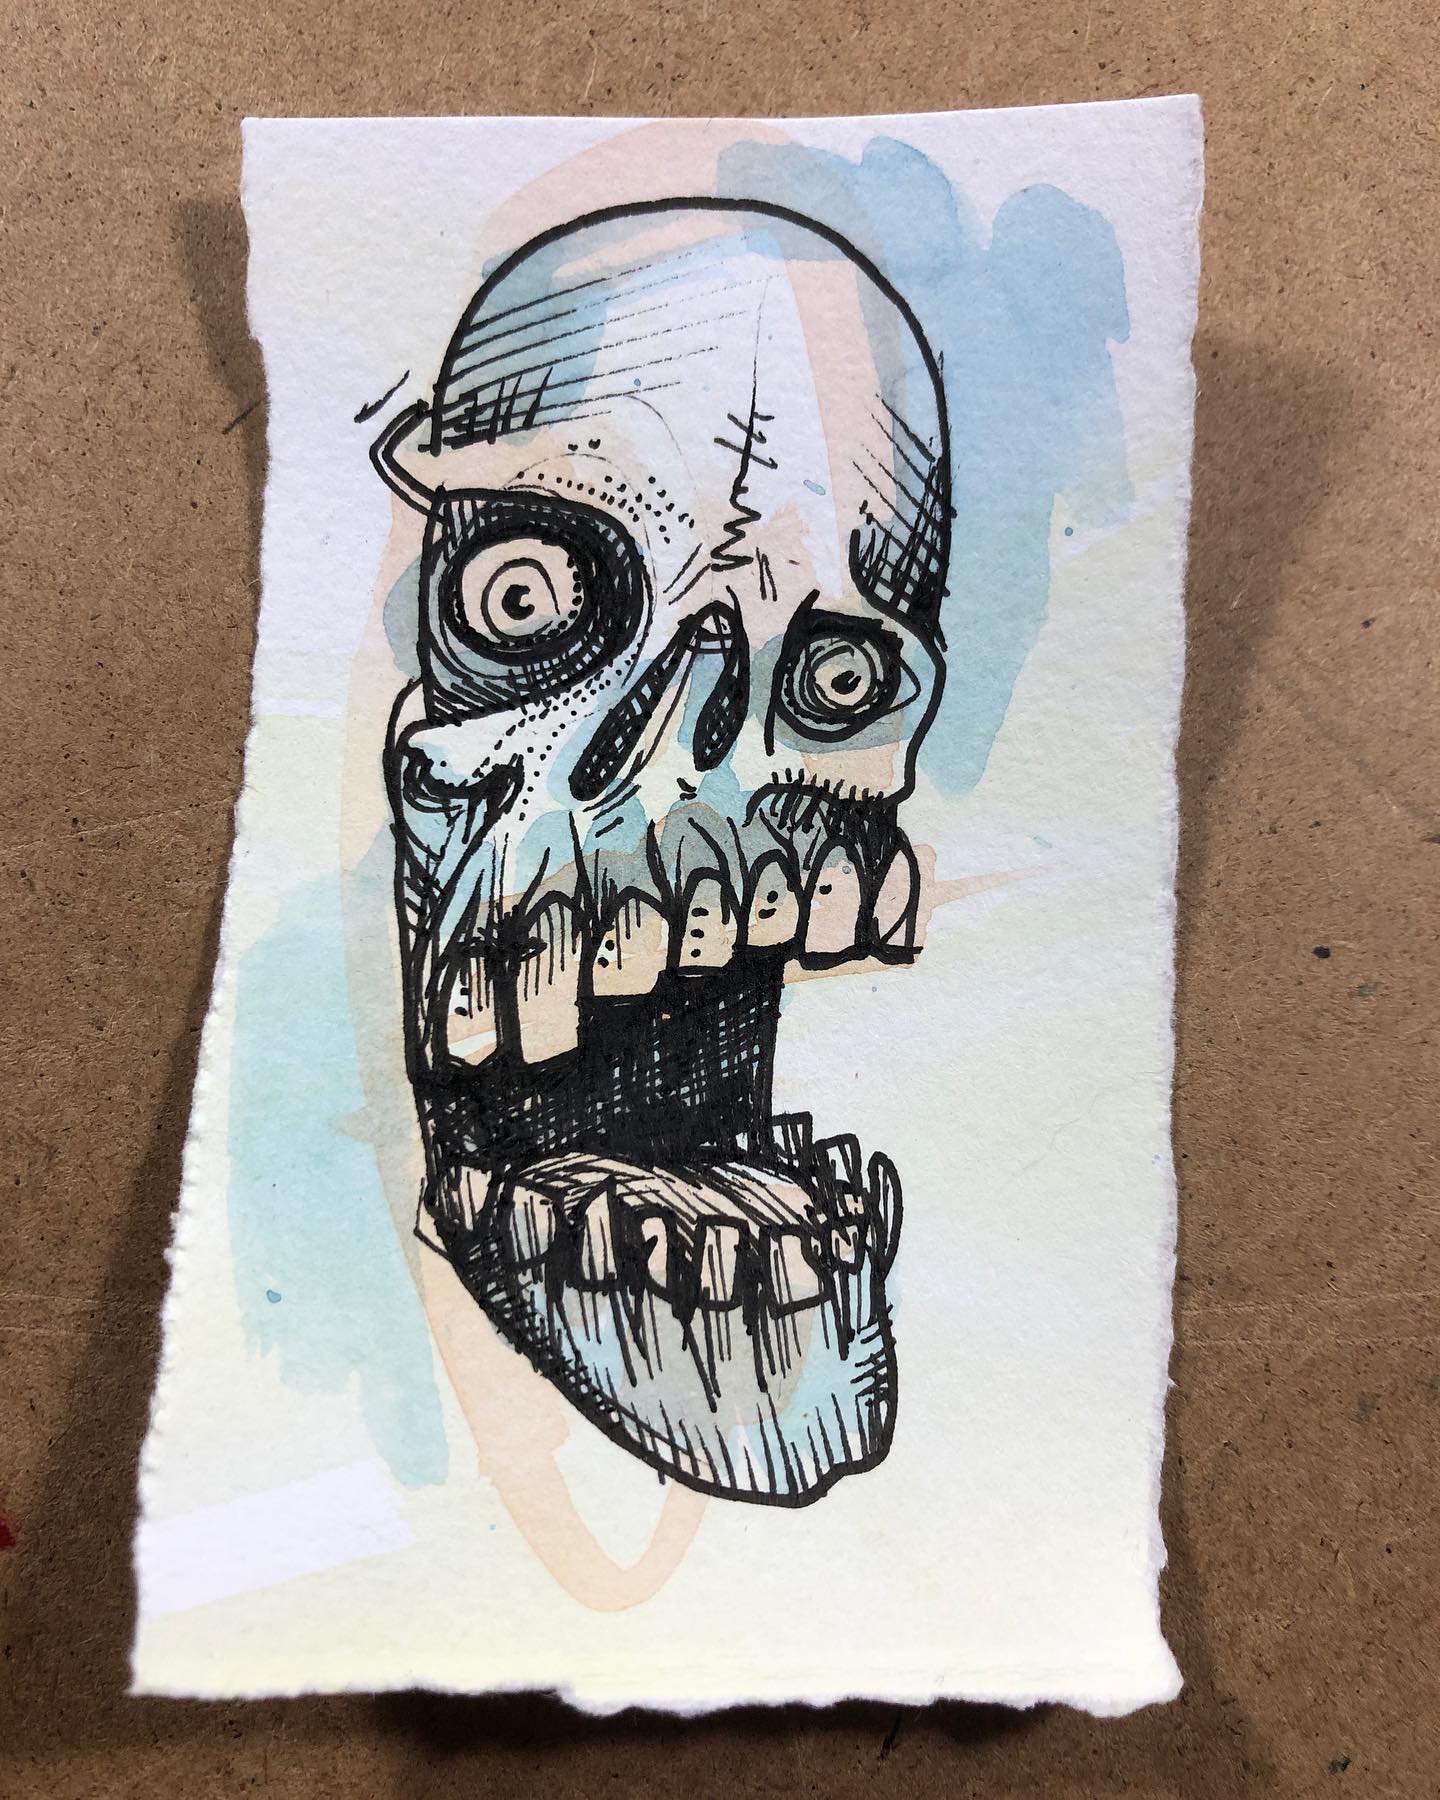 Chompy-chompy! Ink and watercolor drawing of a chomping skull face with big ole teeth